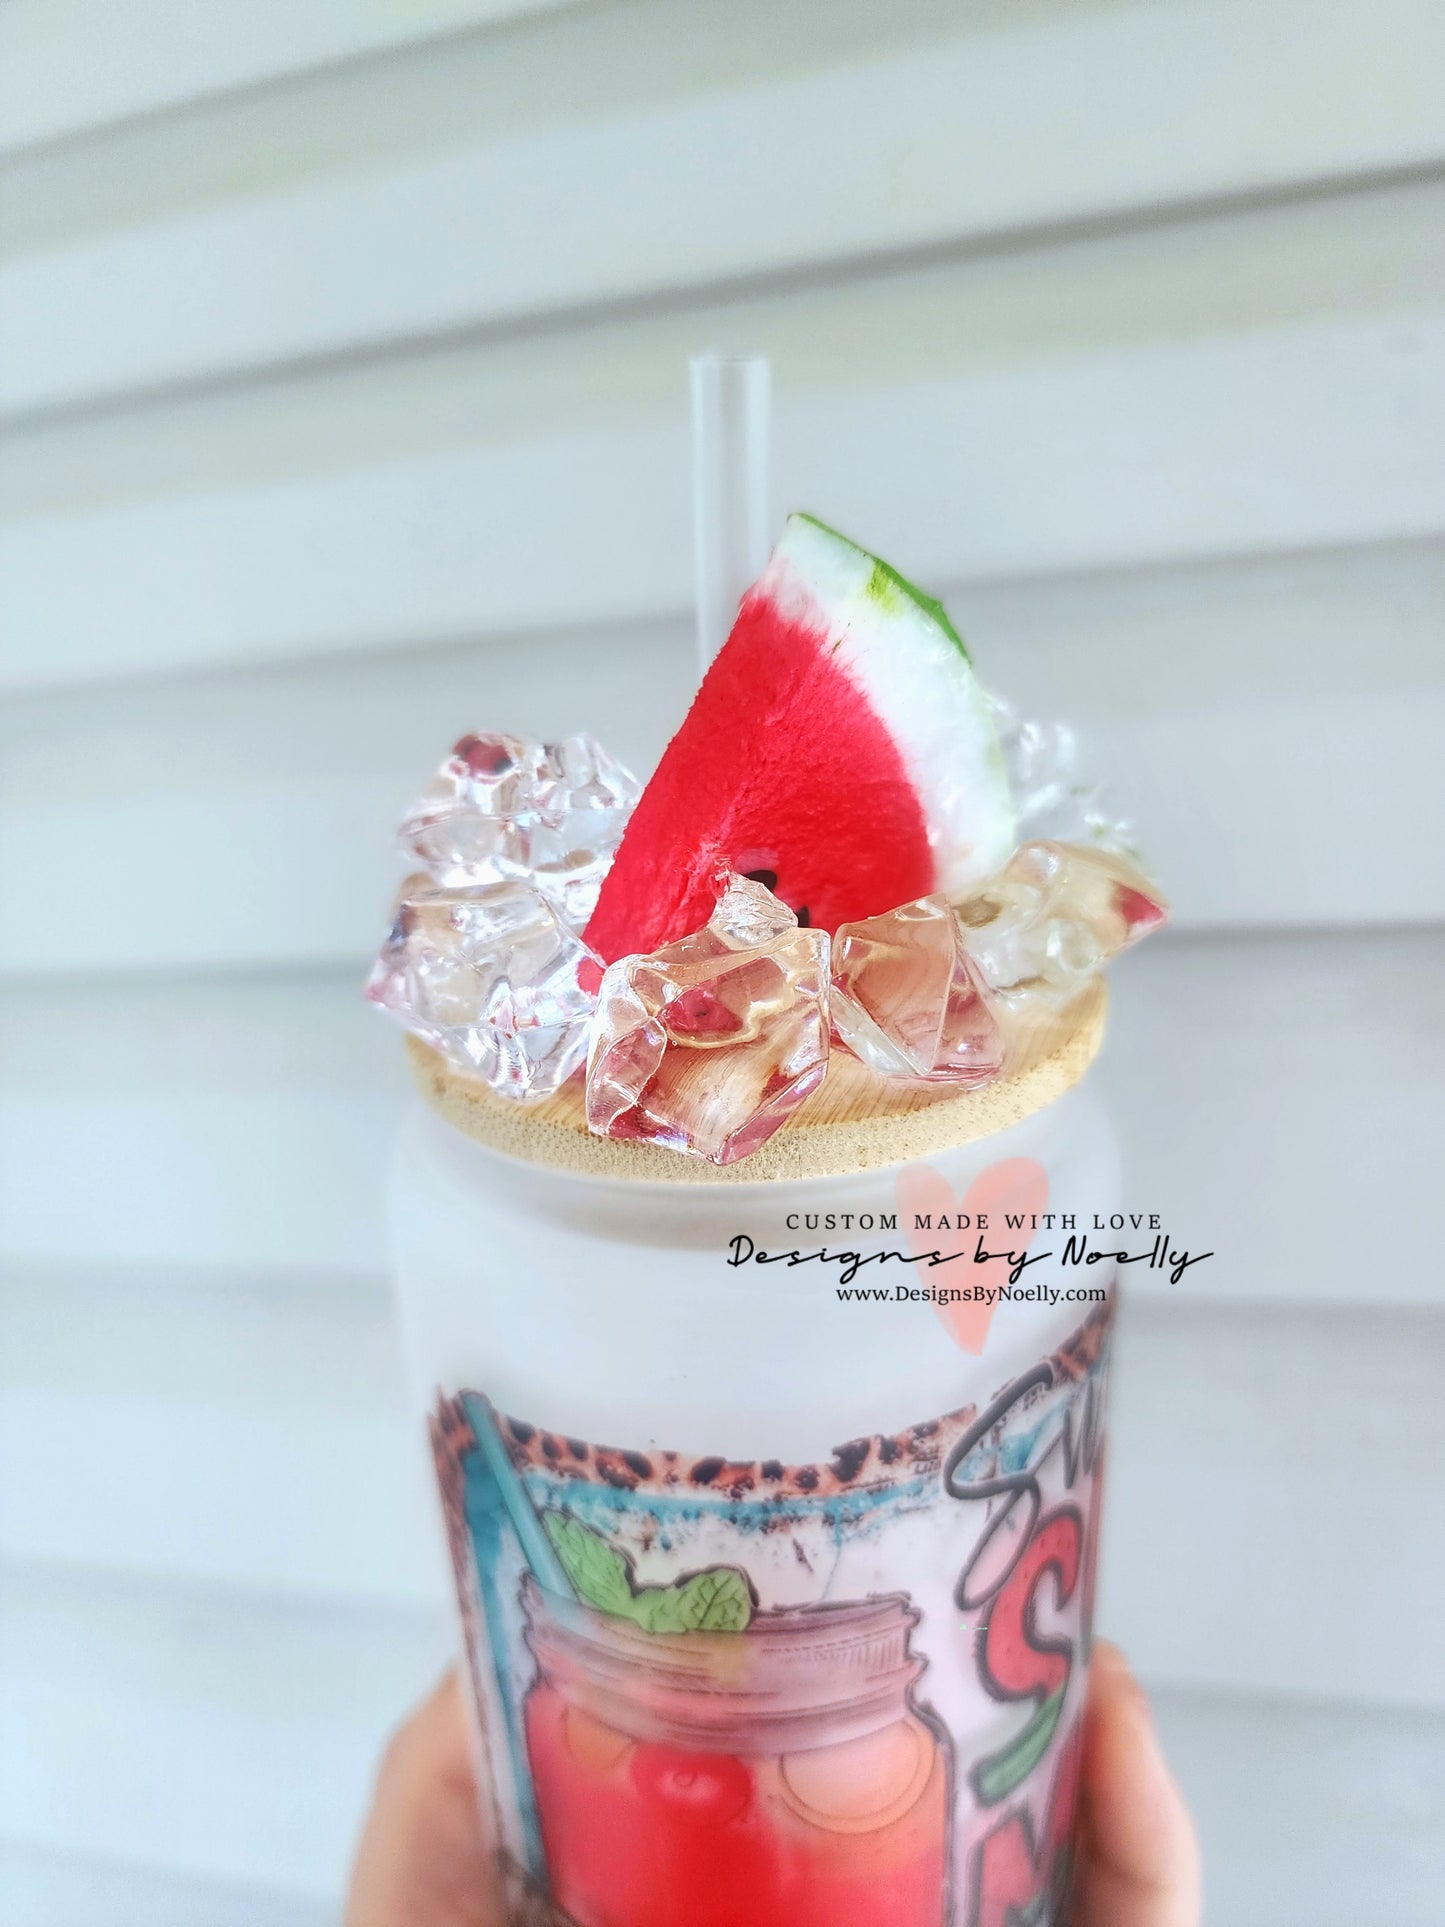 Sweet Summer Time Watermelon Can Glass Cup